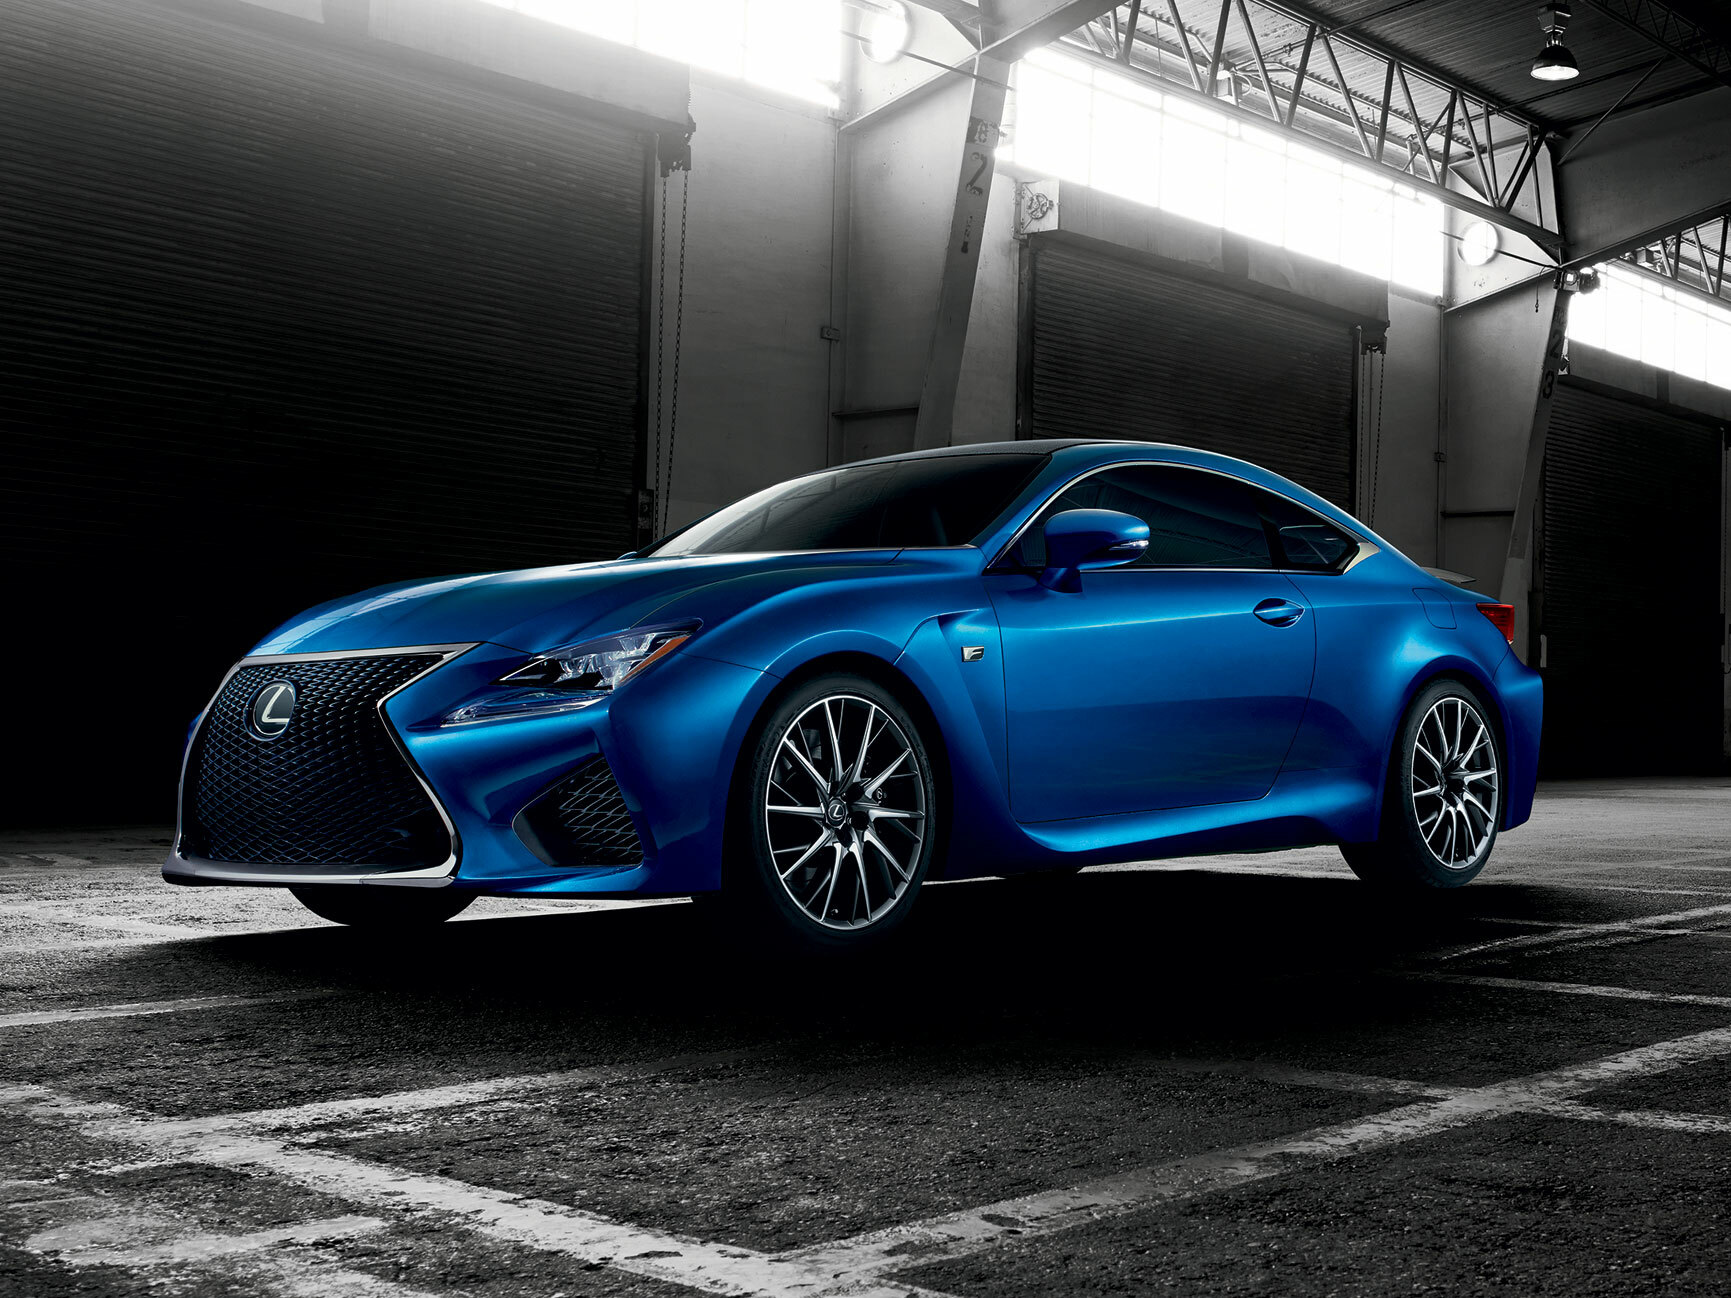 Lexus sizes up BMW with the potent 450bhp RC-F